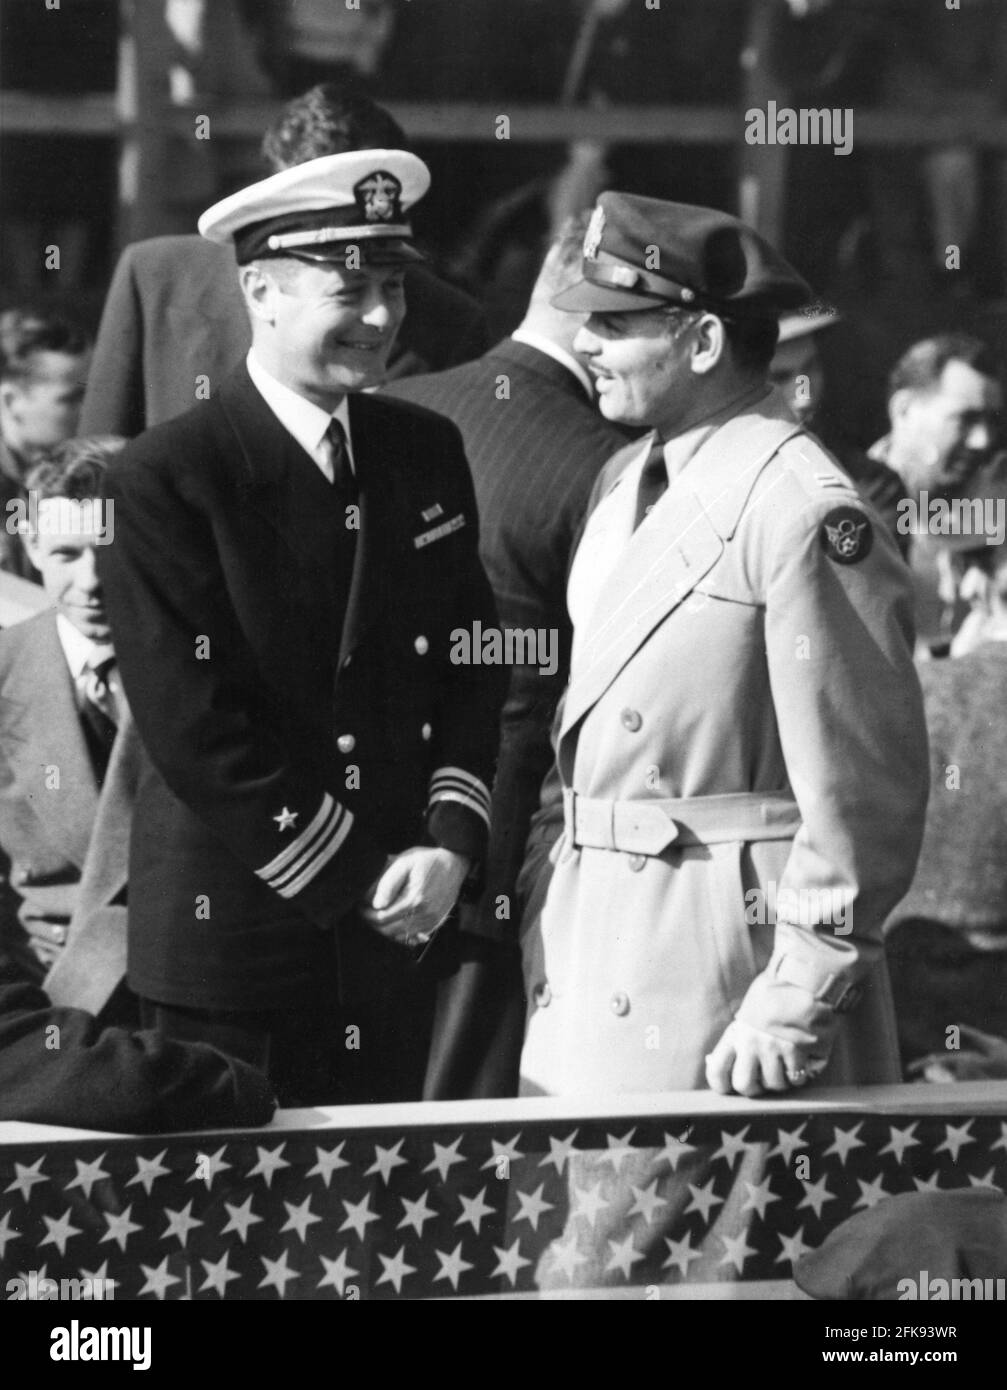 Lieutenant Commander ROBERT MONTGOMERY of the U.S. Navy and Captain CLARK GABLE of the Army Air Forces at the christening ceremony for the Liberty Ship U.S.S. CAROLE LOMBARD on Saturday January 15th 1944 at the Terminal Island Docks between the Port of Los Angeles and Port of Long Beach, California Stock Photo